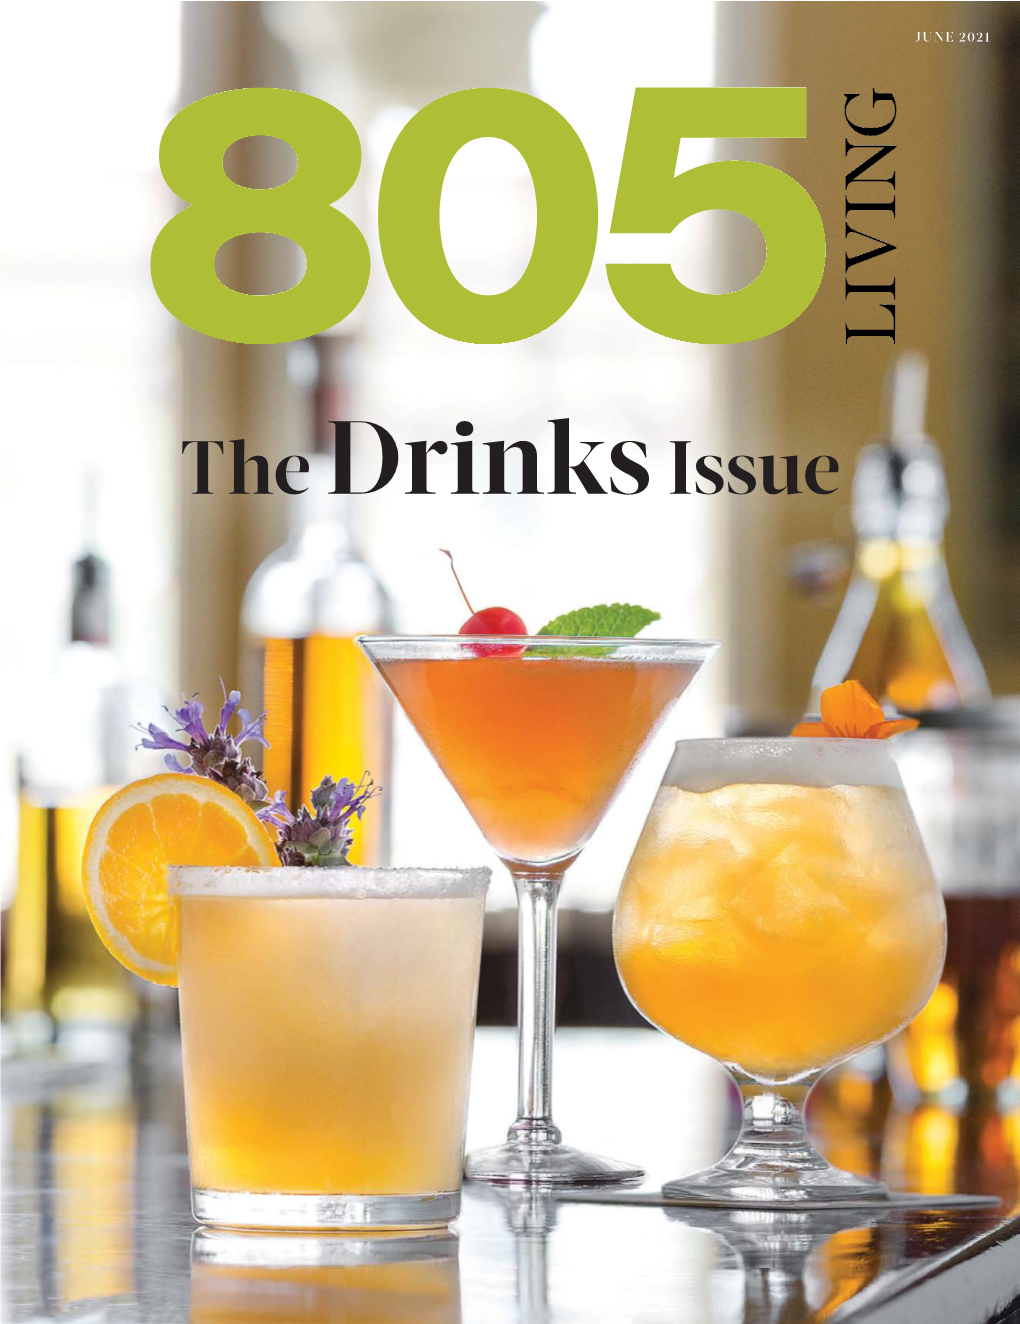 The Drinksissue